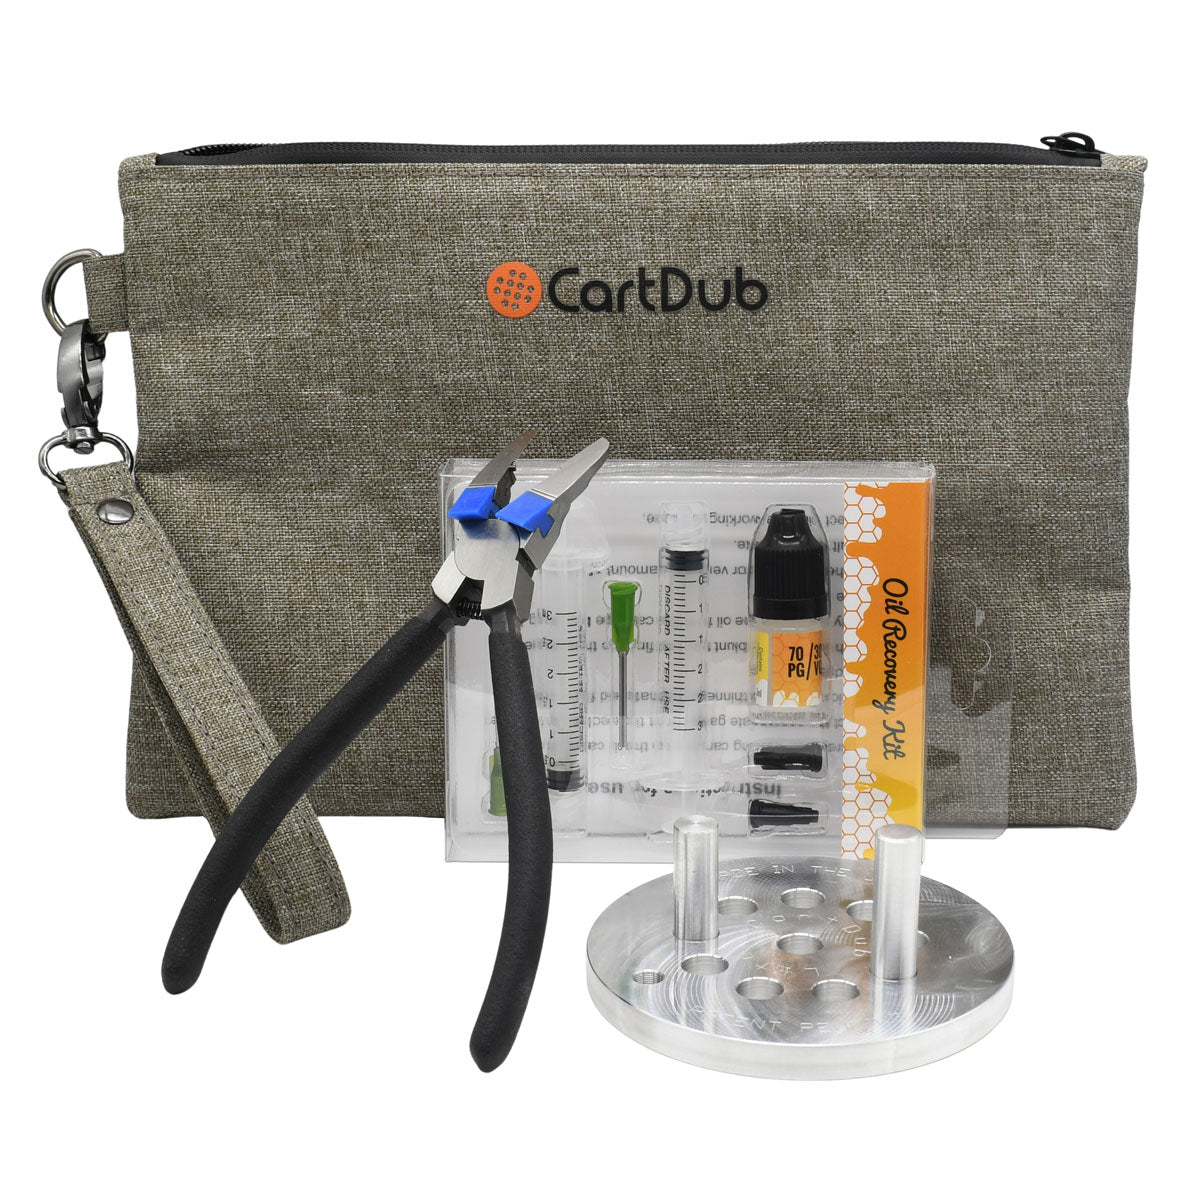 CartDub Kit To Open and Remove Oil from Cartridge